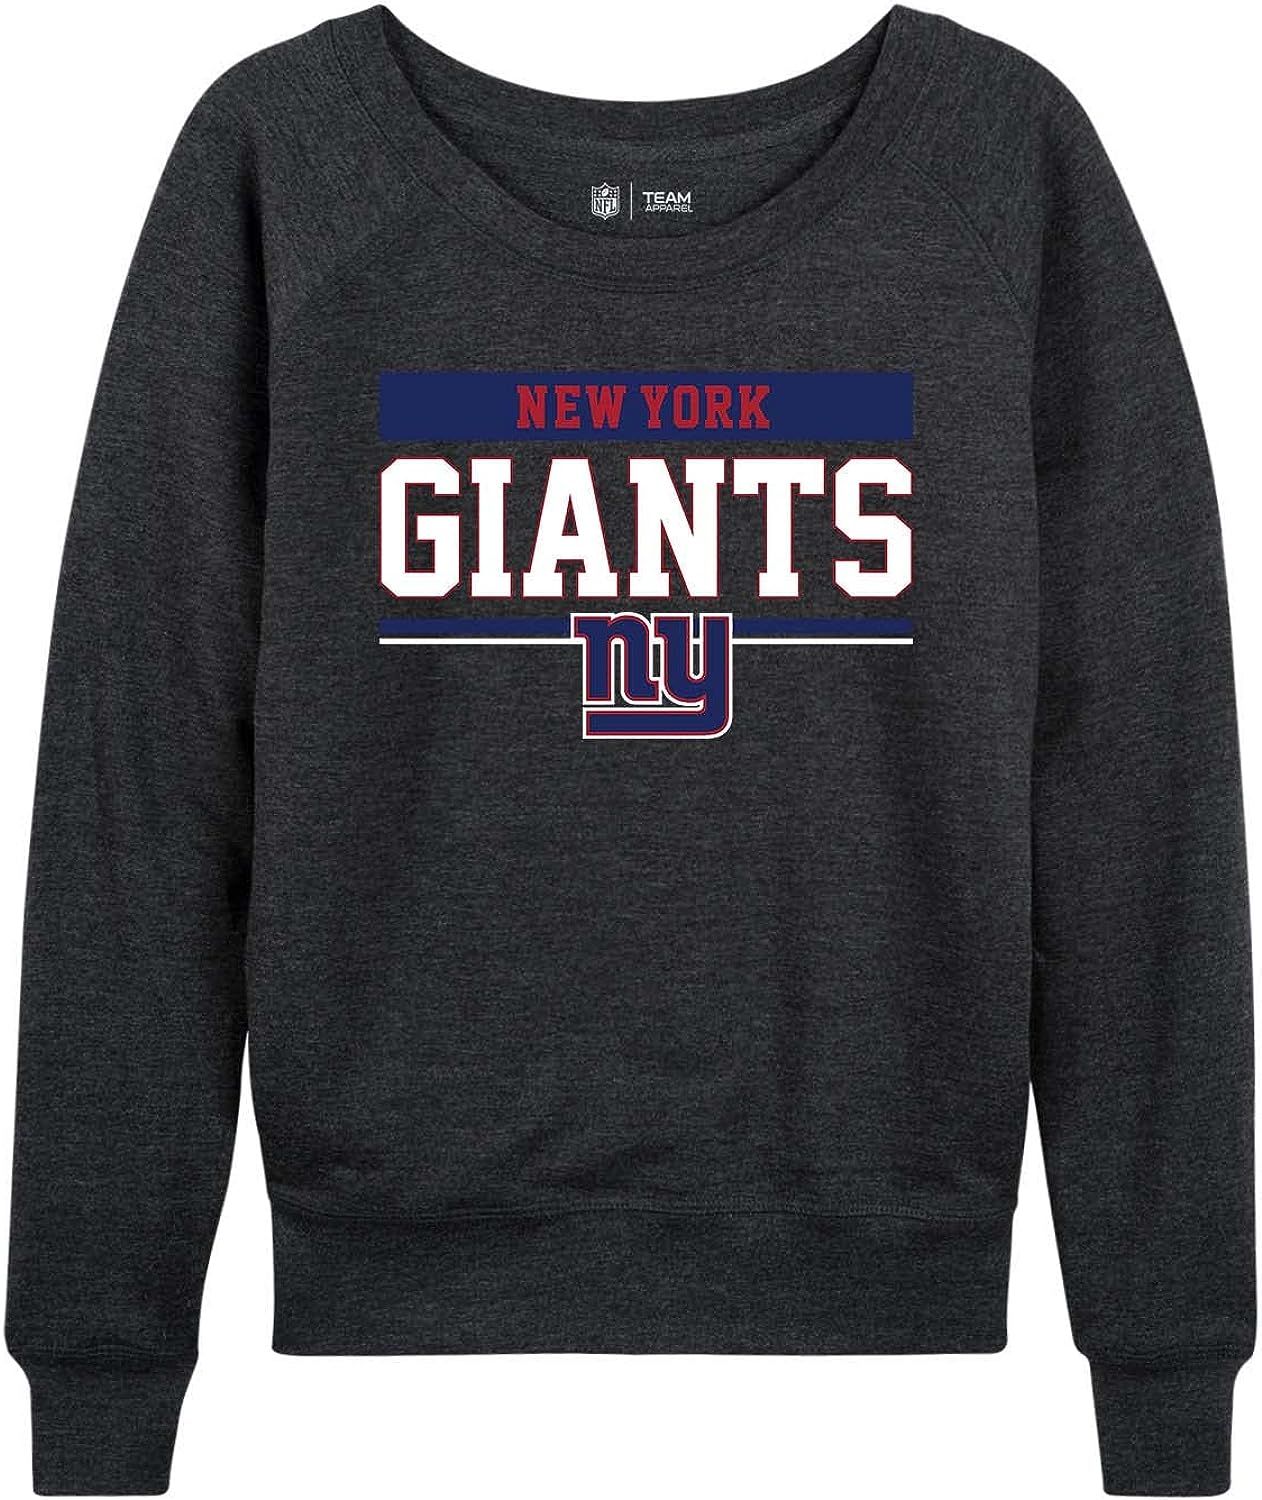 NFL Women's Plus Size Team Block Charcoal Crewneck- Tagless Pullover - Relaxed Raglan- Stay Cool and | Amazon (US)